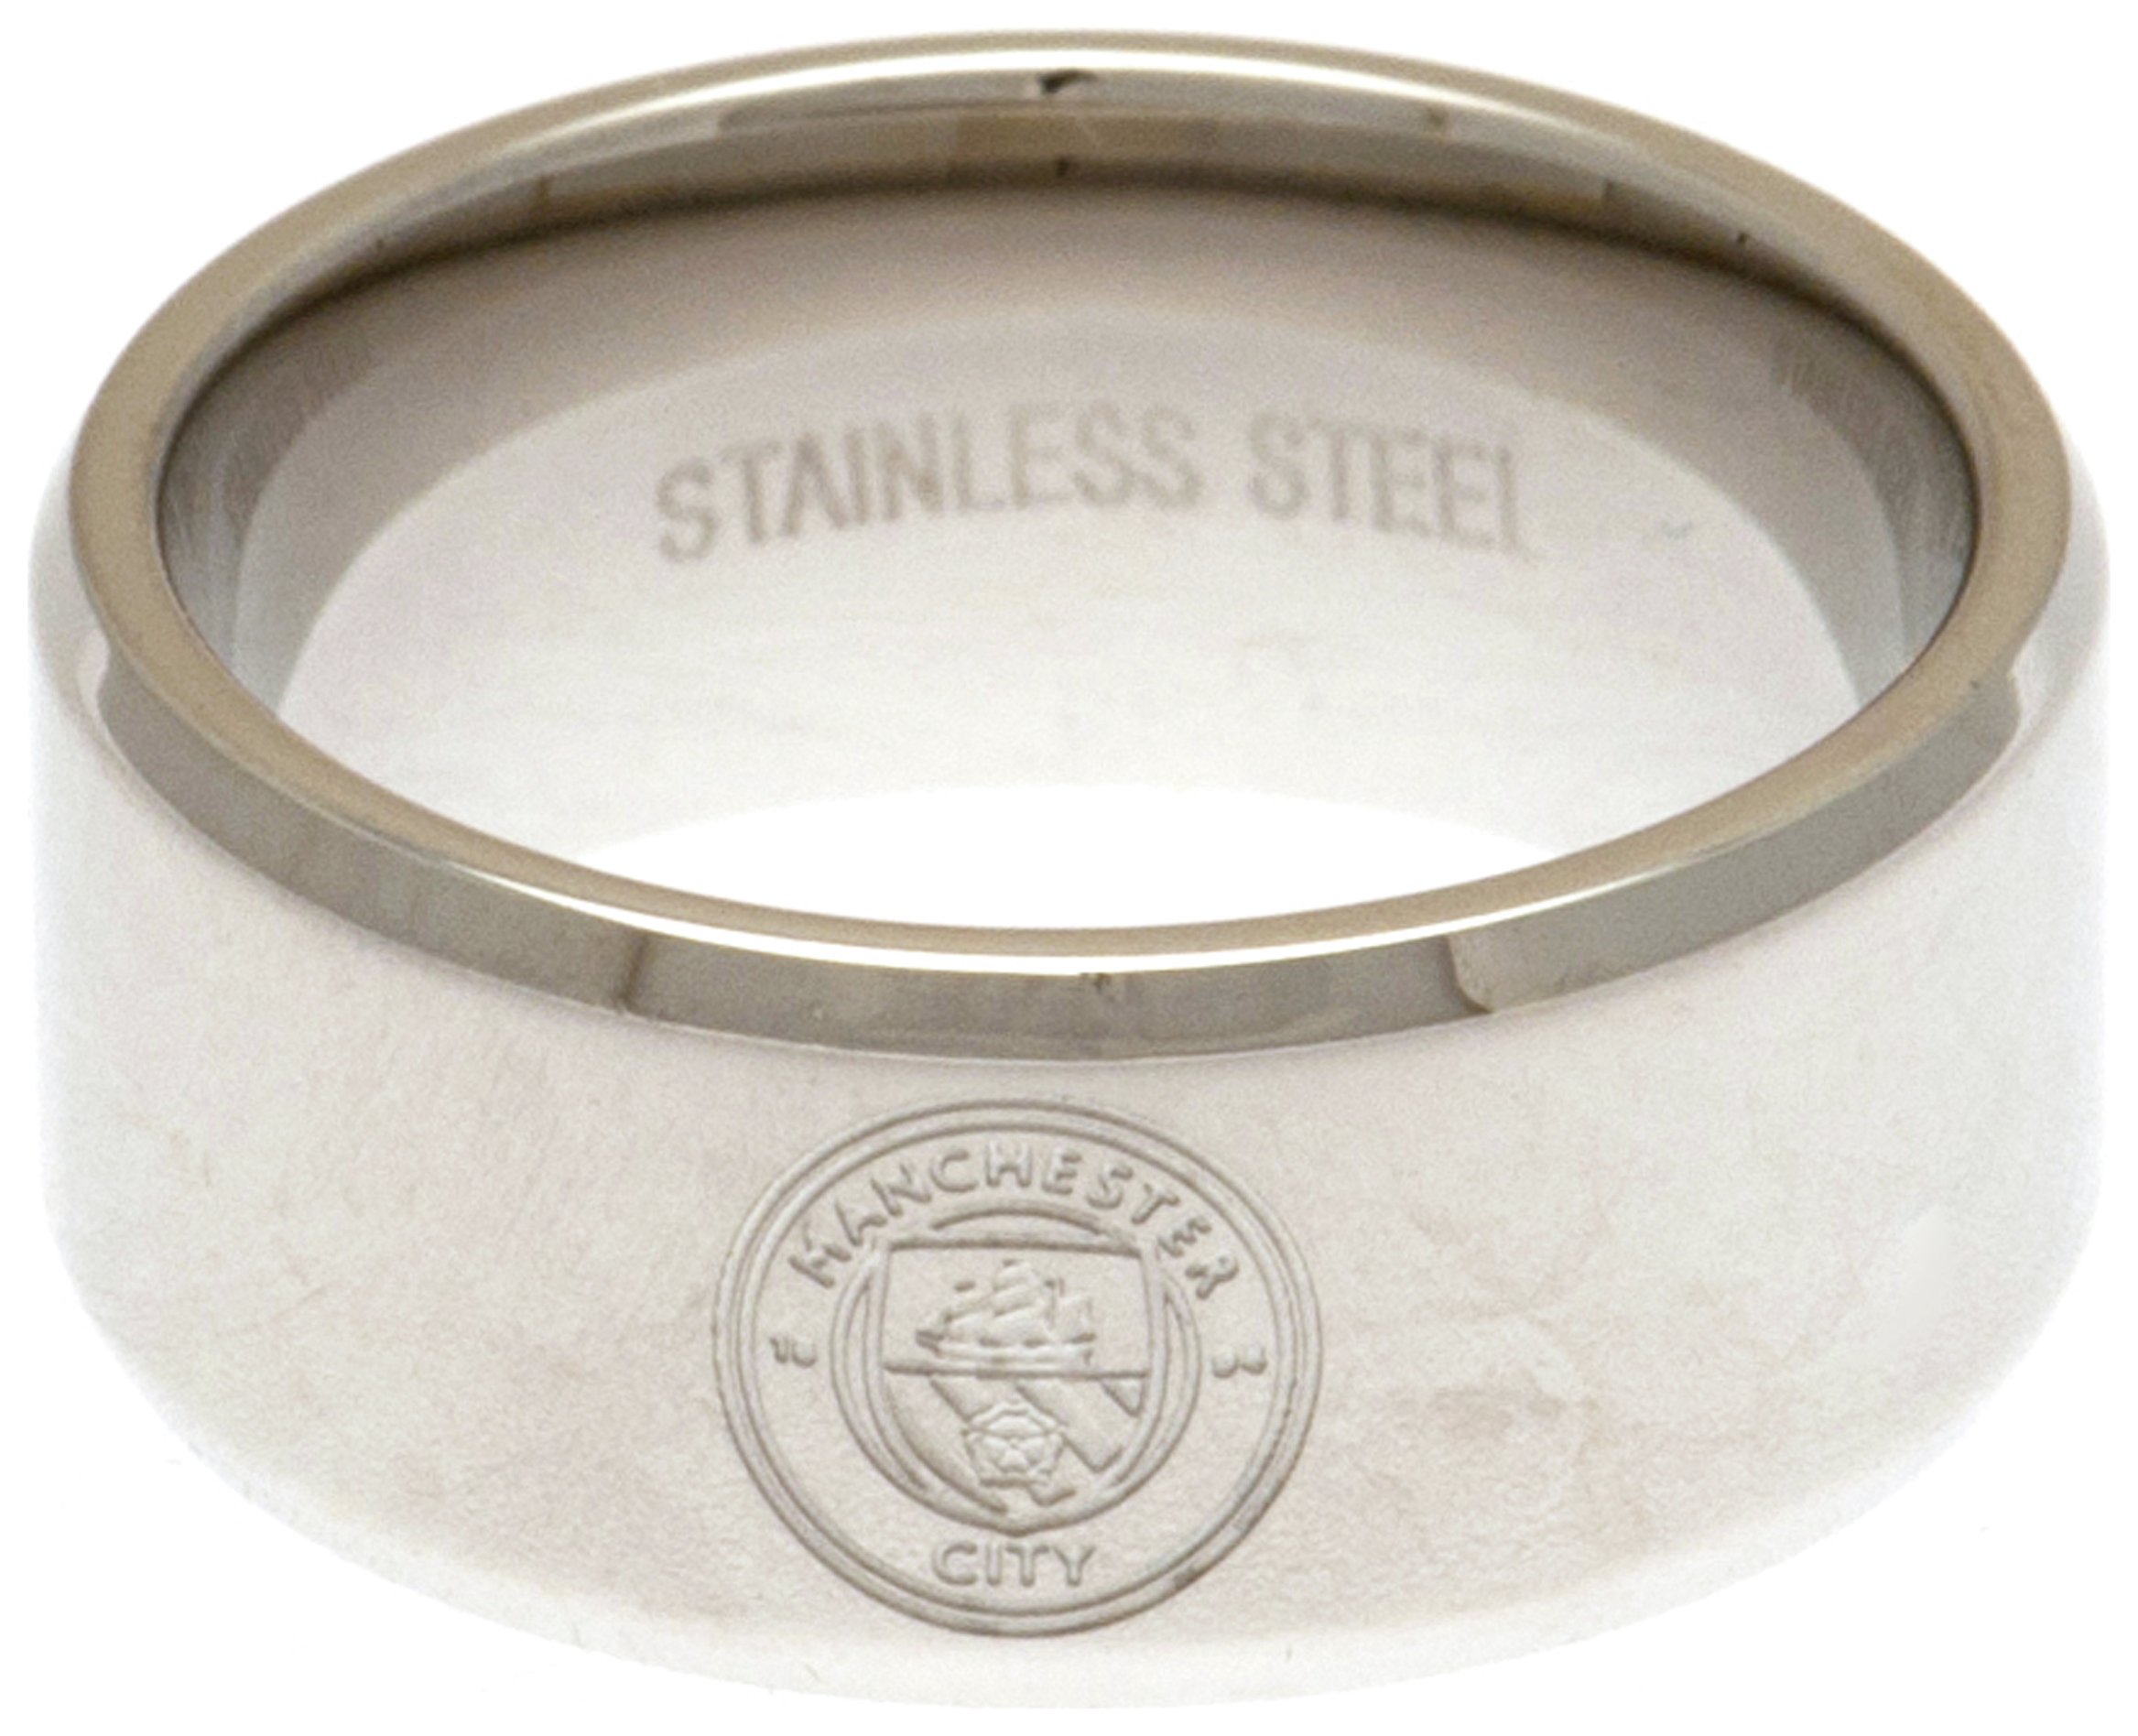 Stainless Steel Man City Ring - Size X